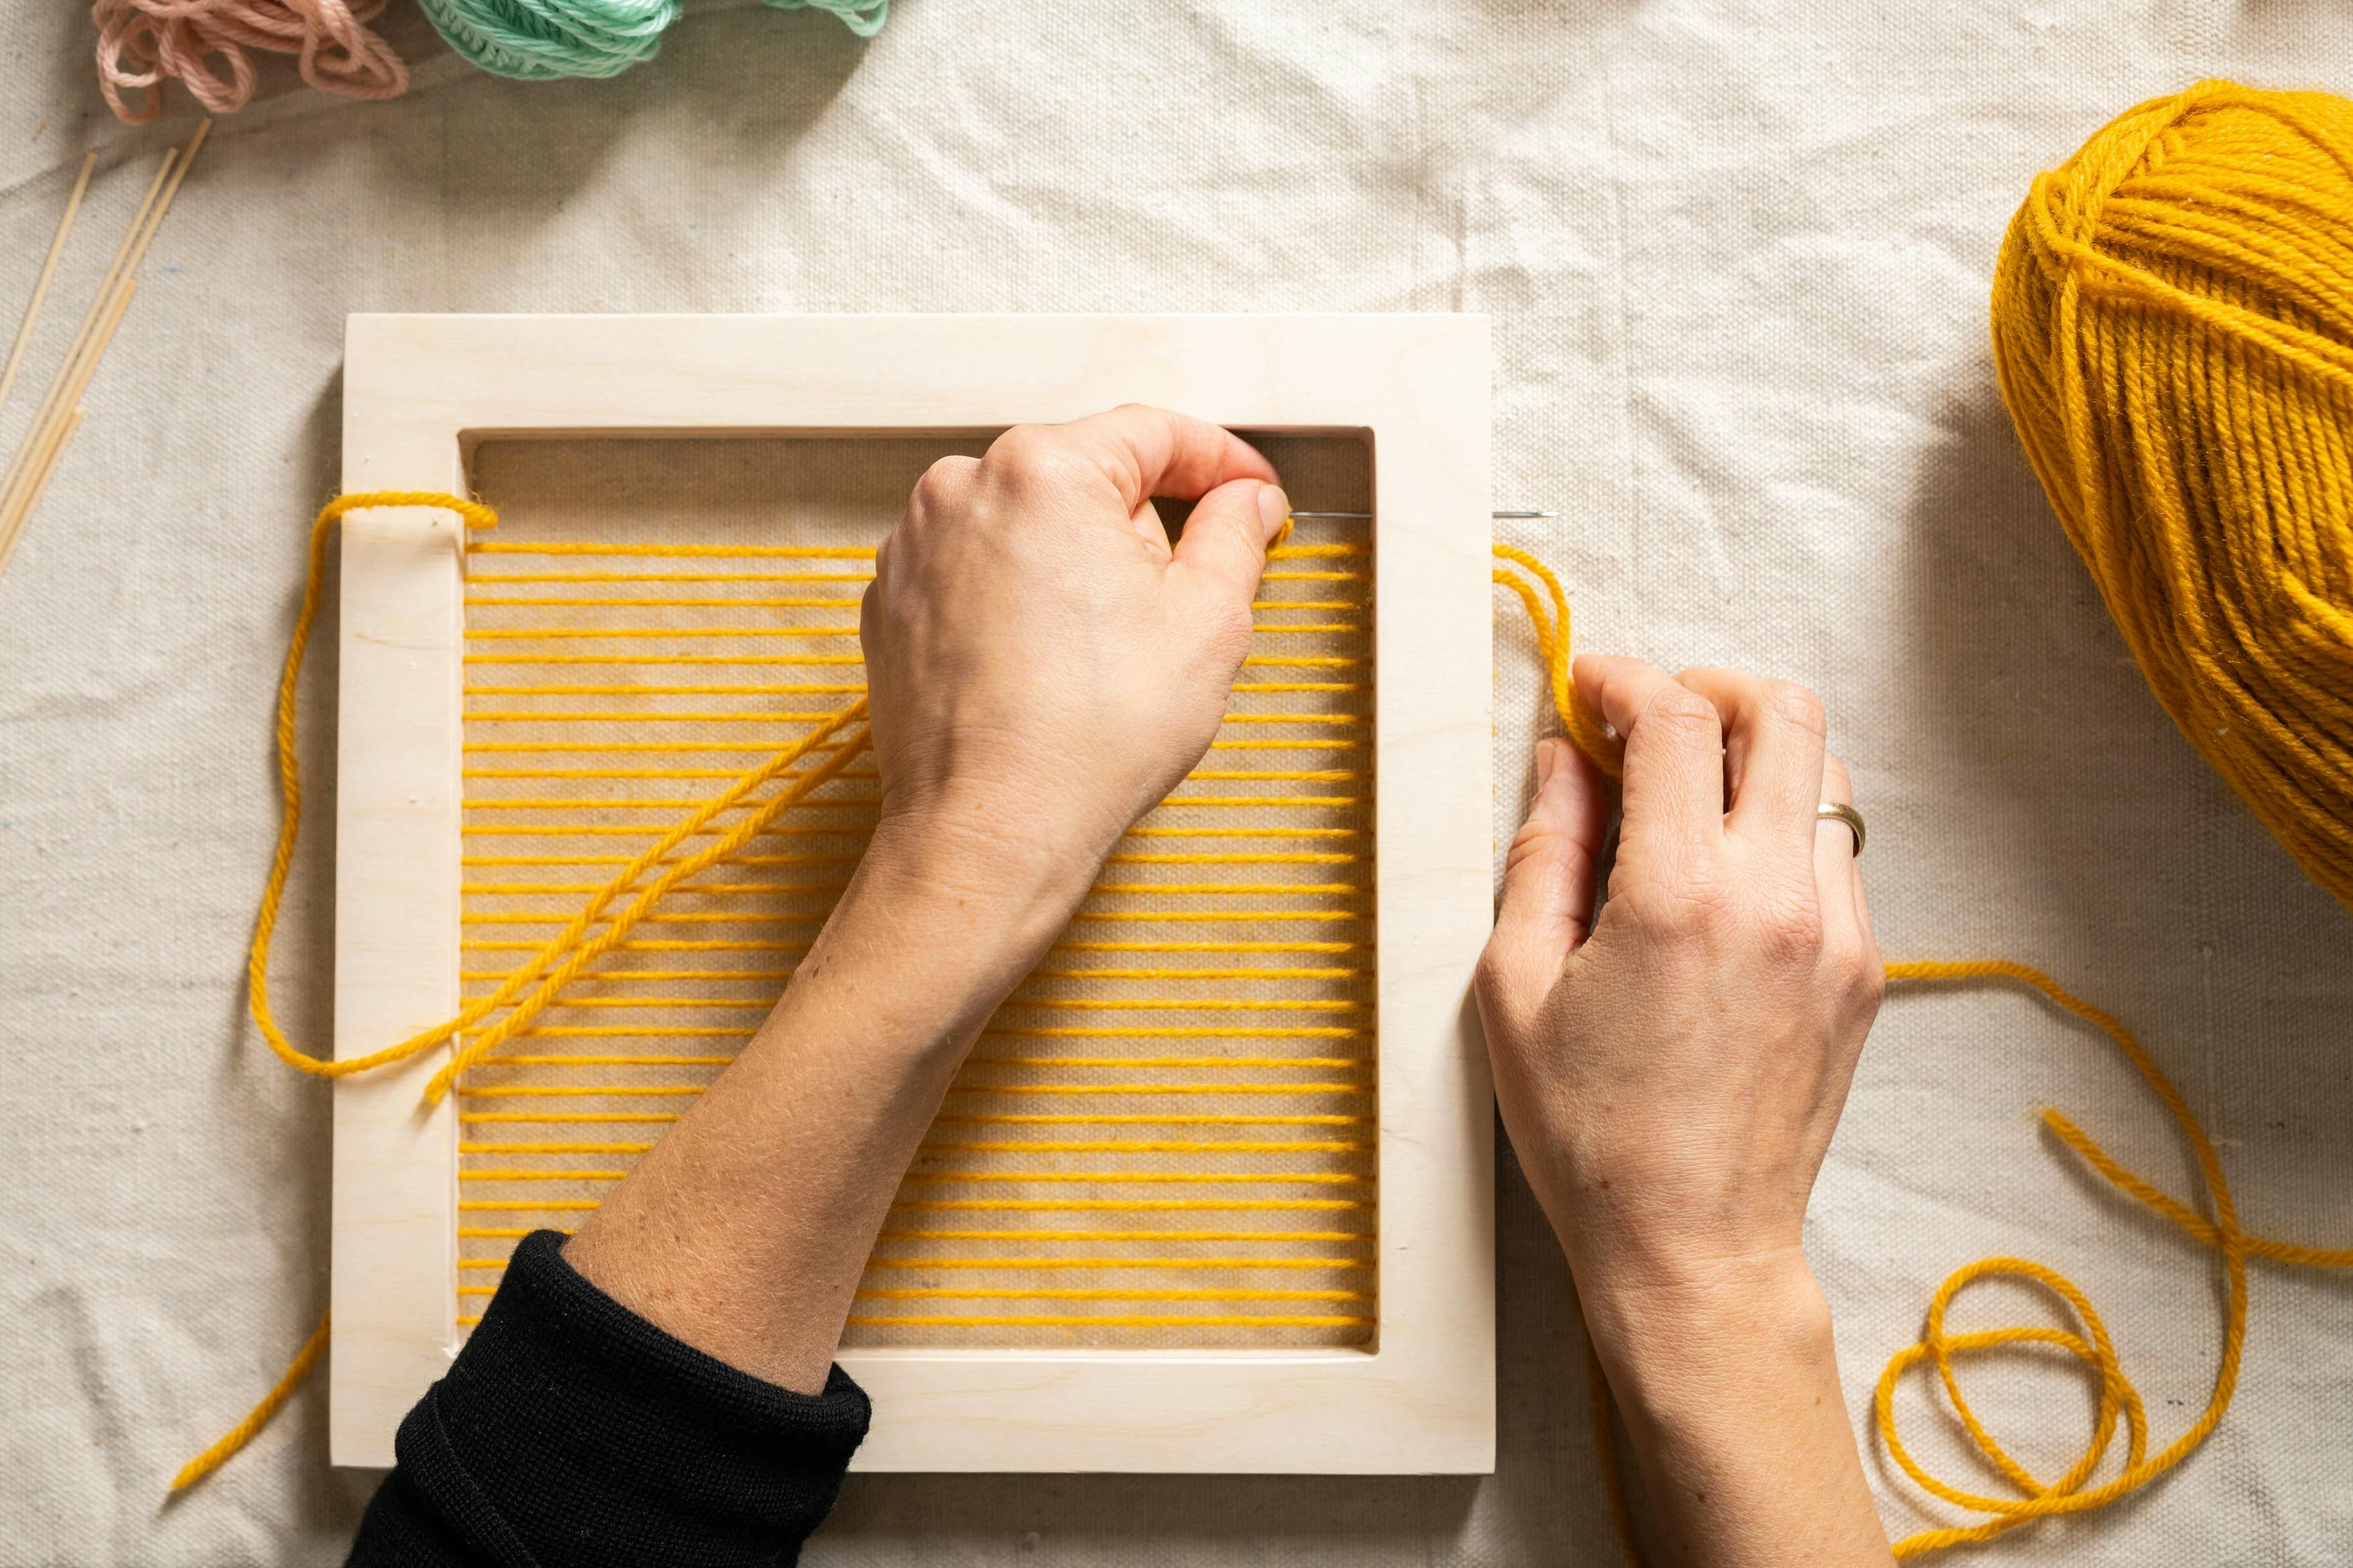 Artist Hayley Sheldon's hands pulling yellow yarn through a wood frame at MacArthur Place.